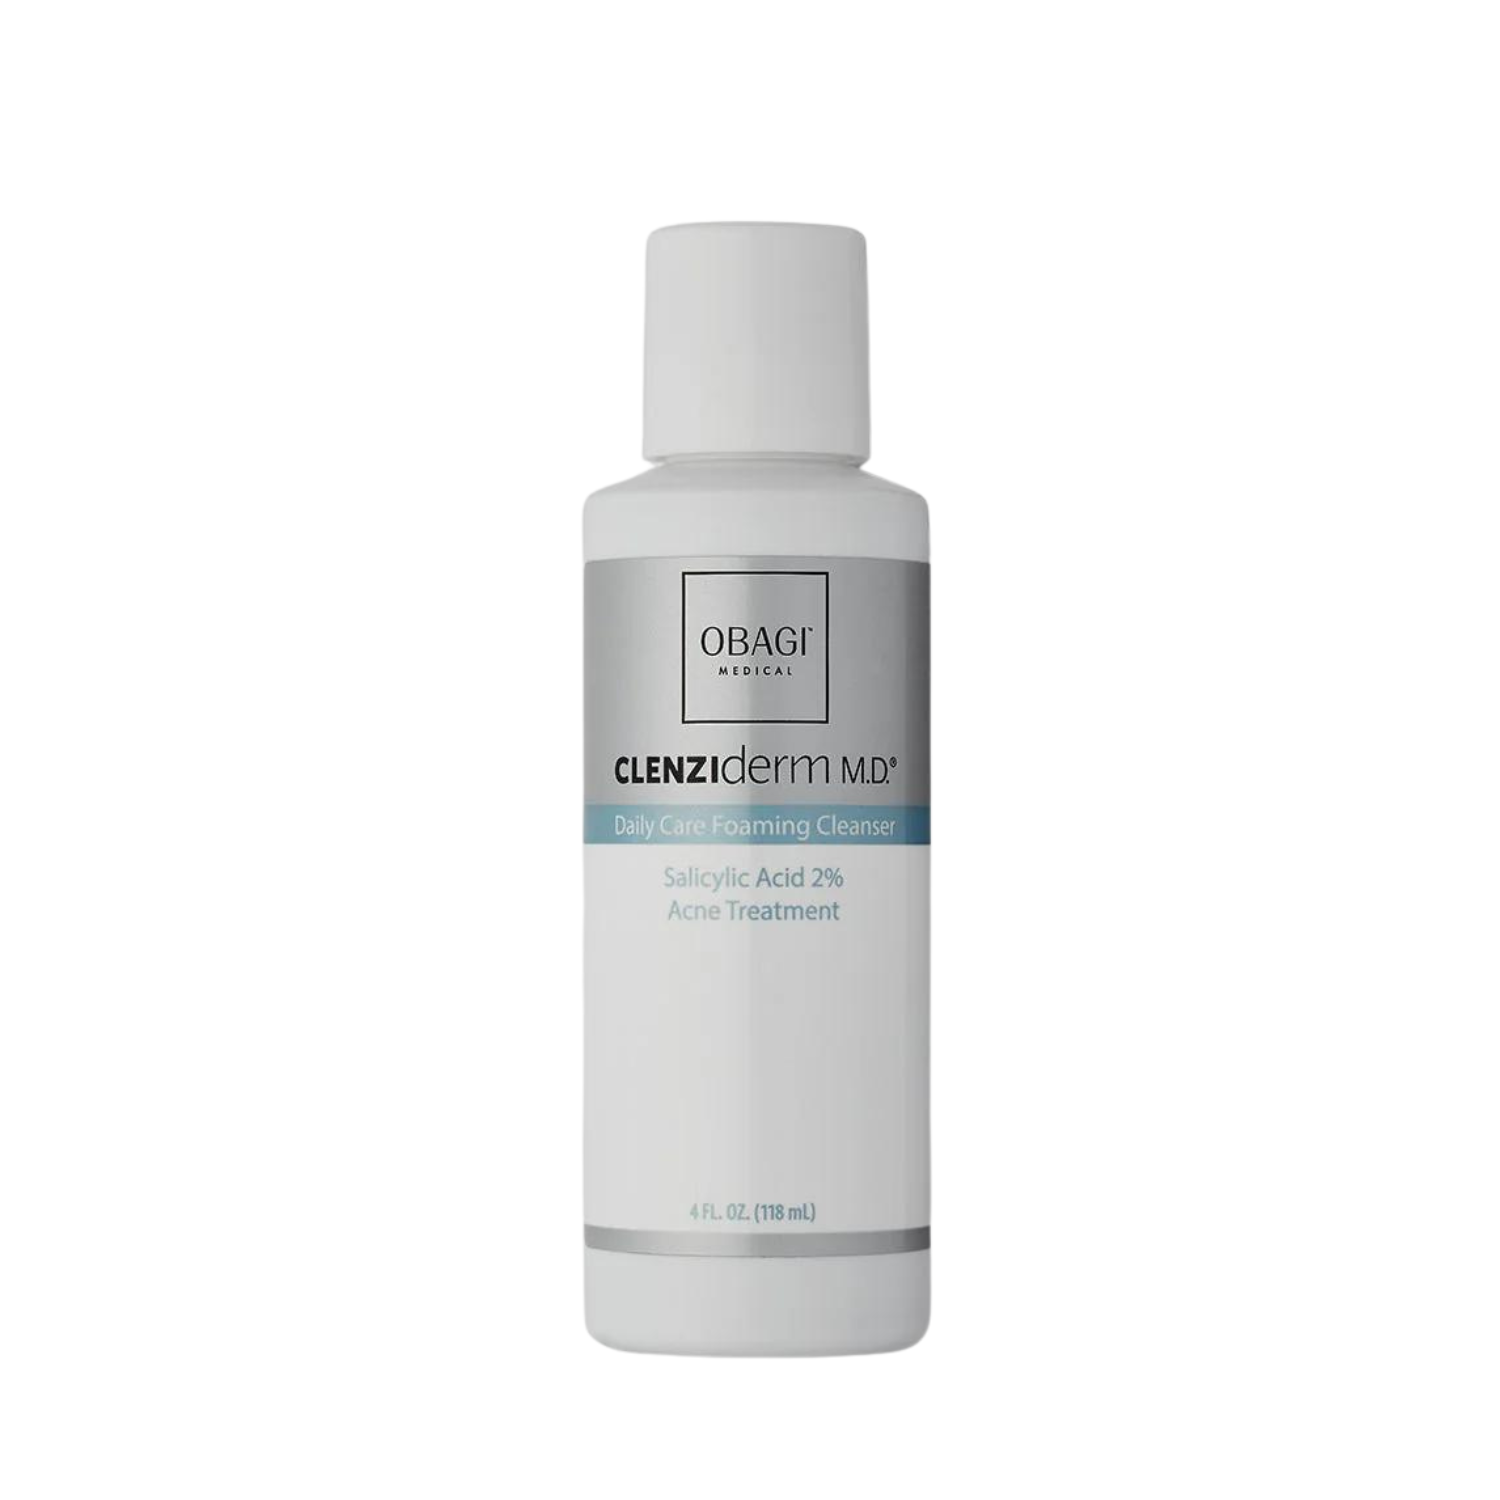 Obagi Clenziderm: Daily Care Foaming Cleanser with Salicylic Acid 2%